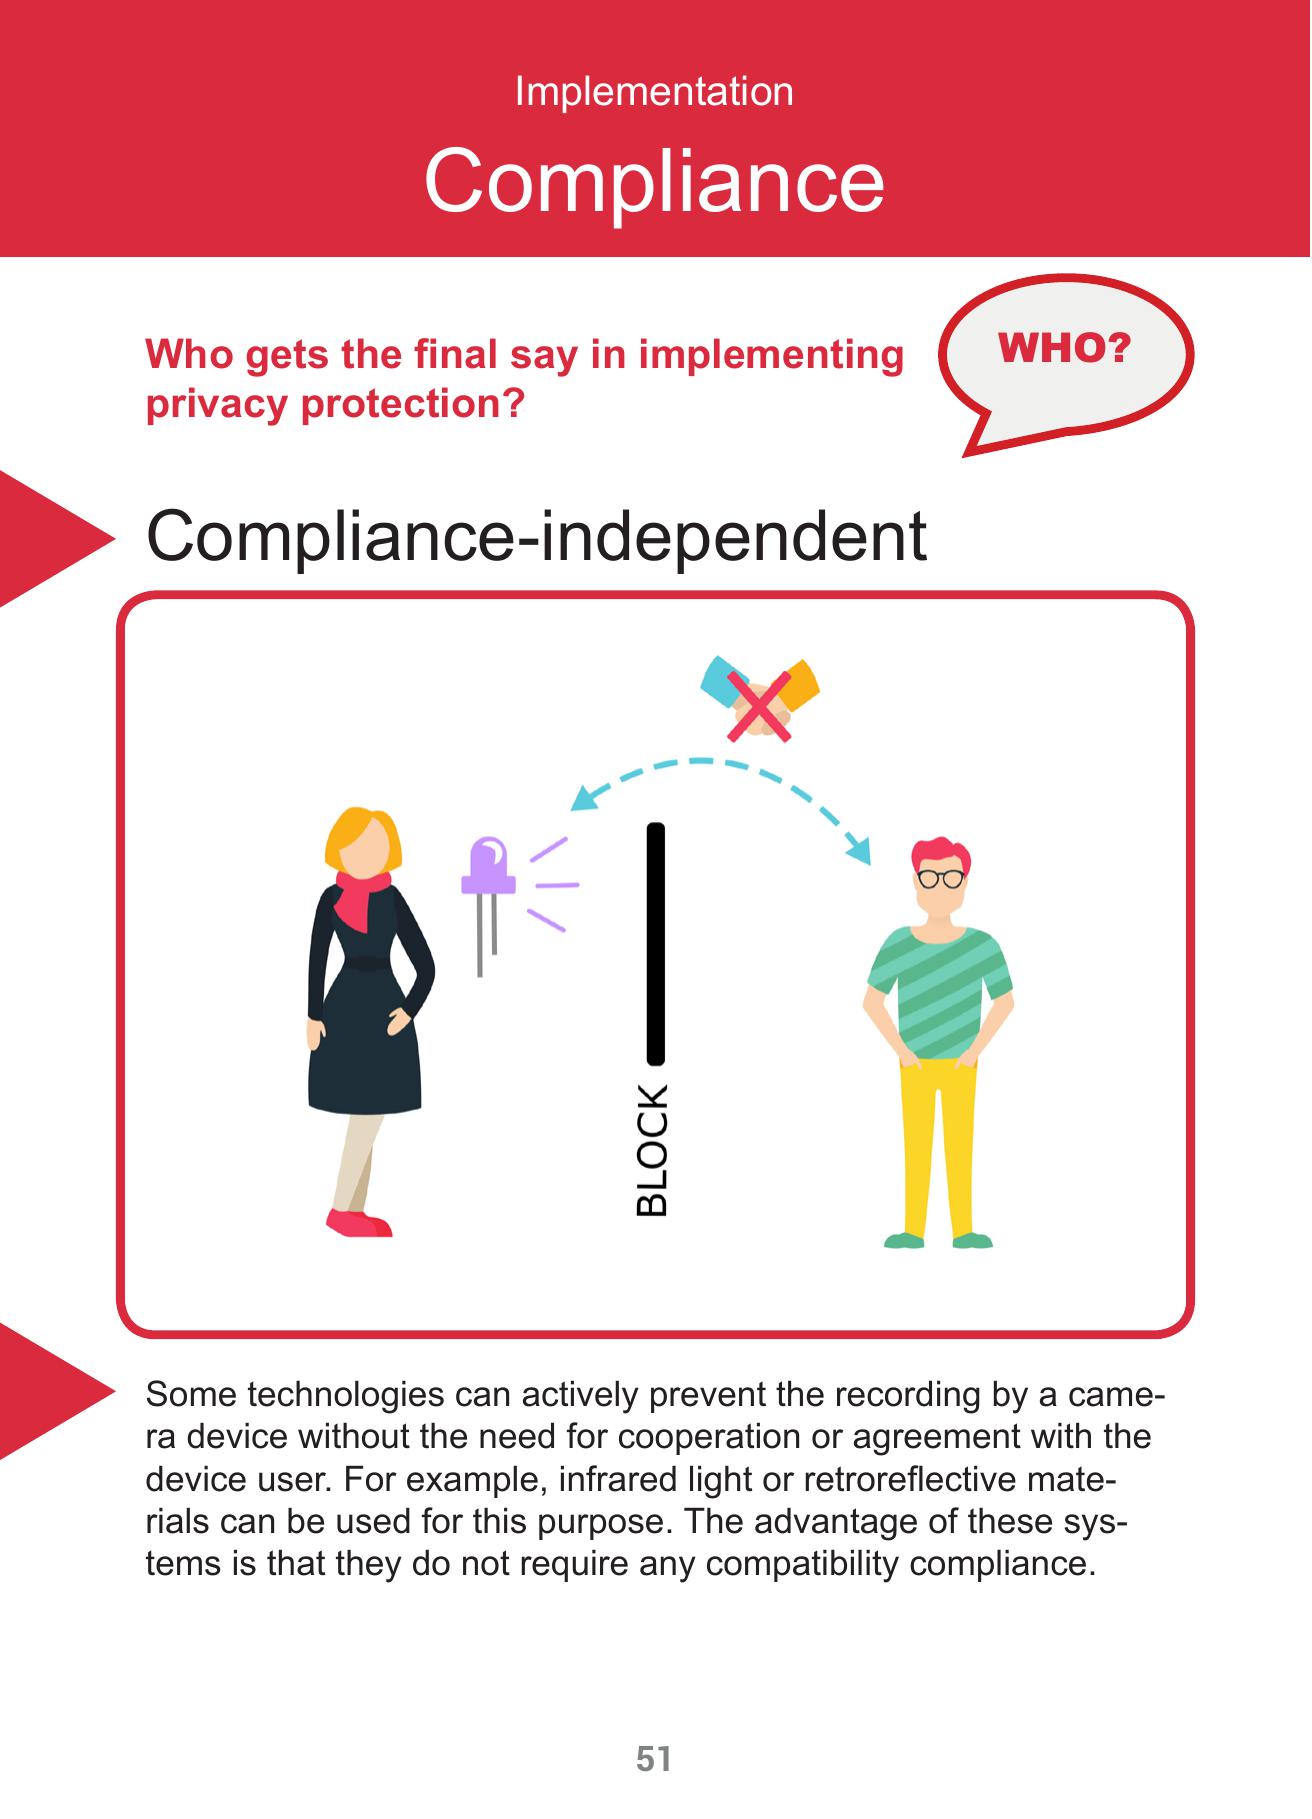 The image shows the front of a card. At the top there is a header with a red background, the rest of the card has a white background The header has the word Implementation in small letters and the word Compliance in bigger letters in it. Below the header are the words Who gets the final say in implementing privacy protection?, to the right of it is a speech bubble with the word WHO? in it. Below that is a heading that says Compliance-independent, to the left of it is a red triangle. Below that is an image with a red border with rounded corners. Two people are divided by a black bar with the words block below it. The person to the left has a purple lamp with three purple lines pointing to the right. A dotted line with arrows on both ends connects the lamp and the person to the right. Above it is a symbol of two hands shaking that is crossed out. Below that is a paragraph with a red triangle to the left of it. The paragraph reads Some technologies can actively prevent the recording by a camera device without the need for cooperation or agreement with the device user. For example, infrared light or retroreflective materials can be used for this purpose. The advantage of these systems is that they do not require any compatibility compliance.